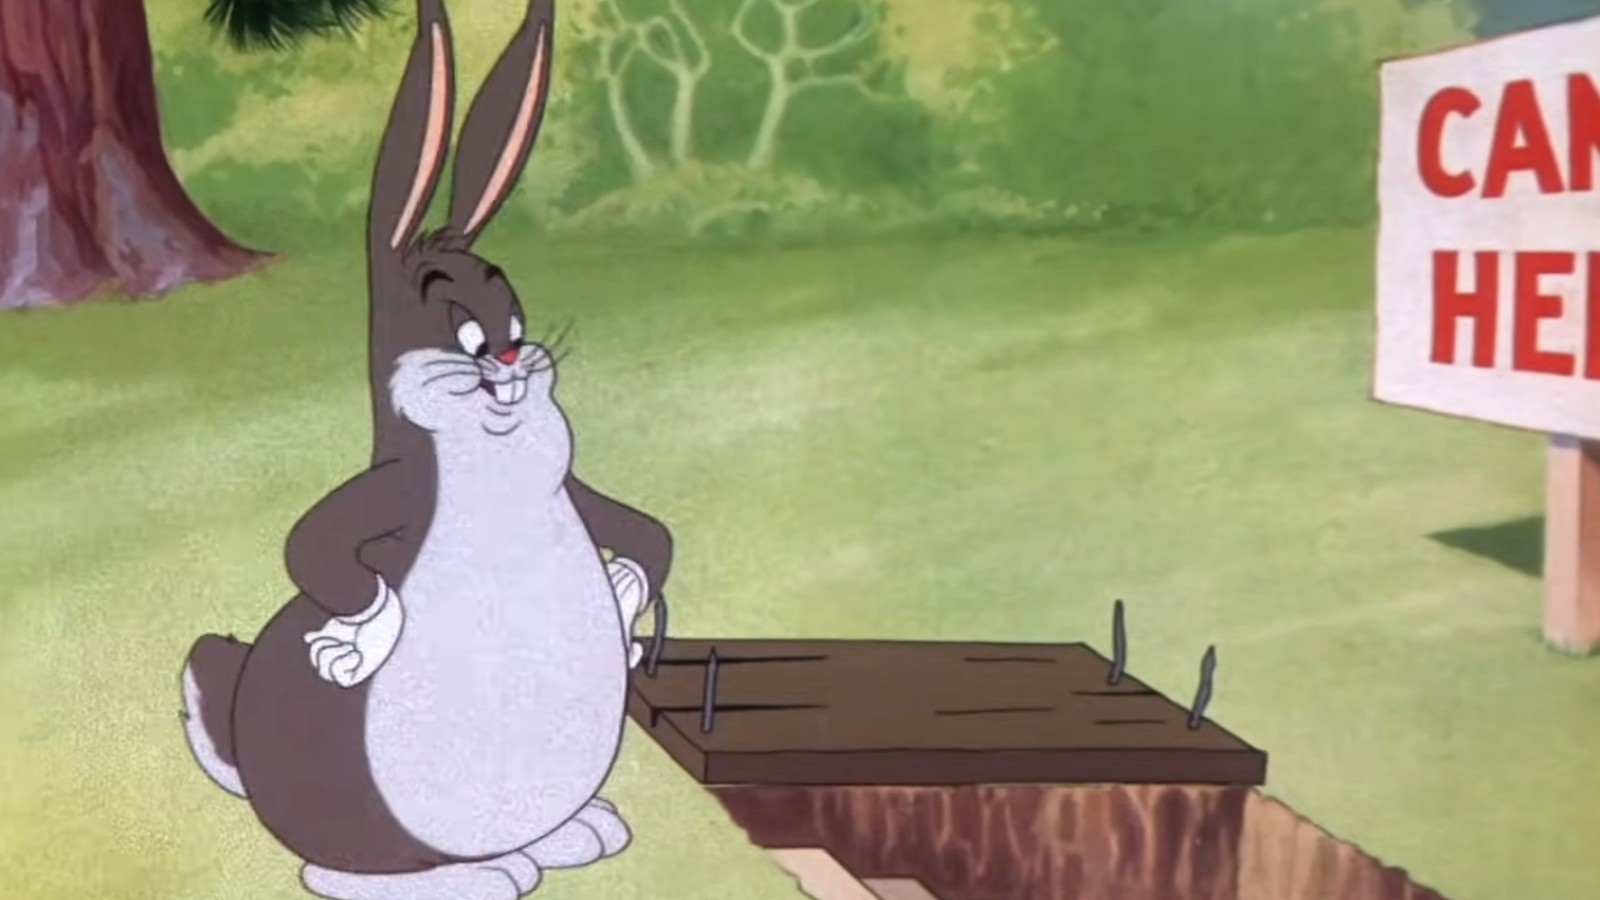 A still of Bugs Bunny in his “Big Chungus” mode.